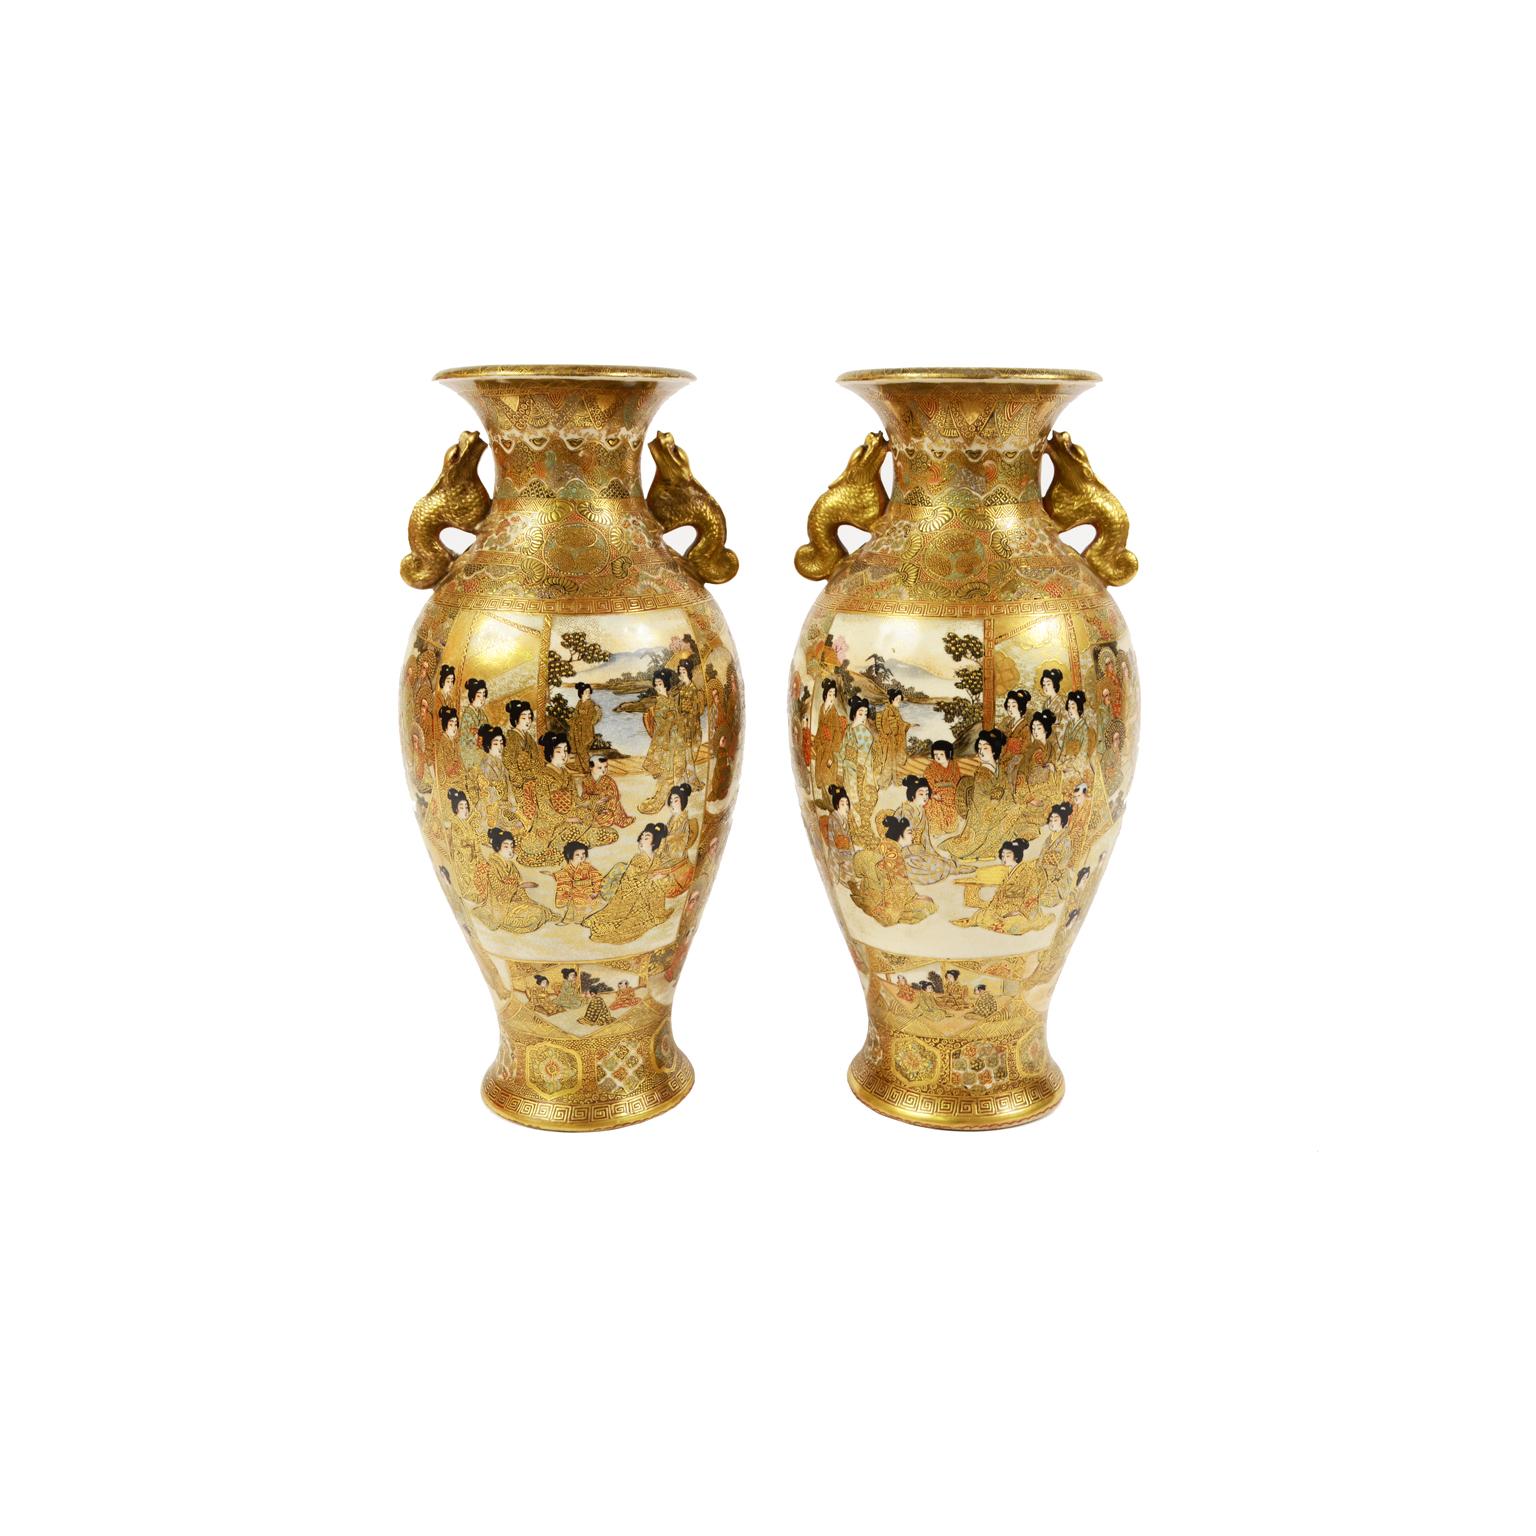 Pair of Satsuma vases made of finely hand-decorated ceramic depicting scenes with geishas and scenes with monks, dragon-shaped handles. Japan, last quarter of the 19th century. On the base signature of the manufacture or artist. Good condition.